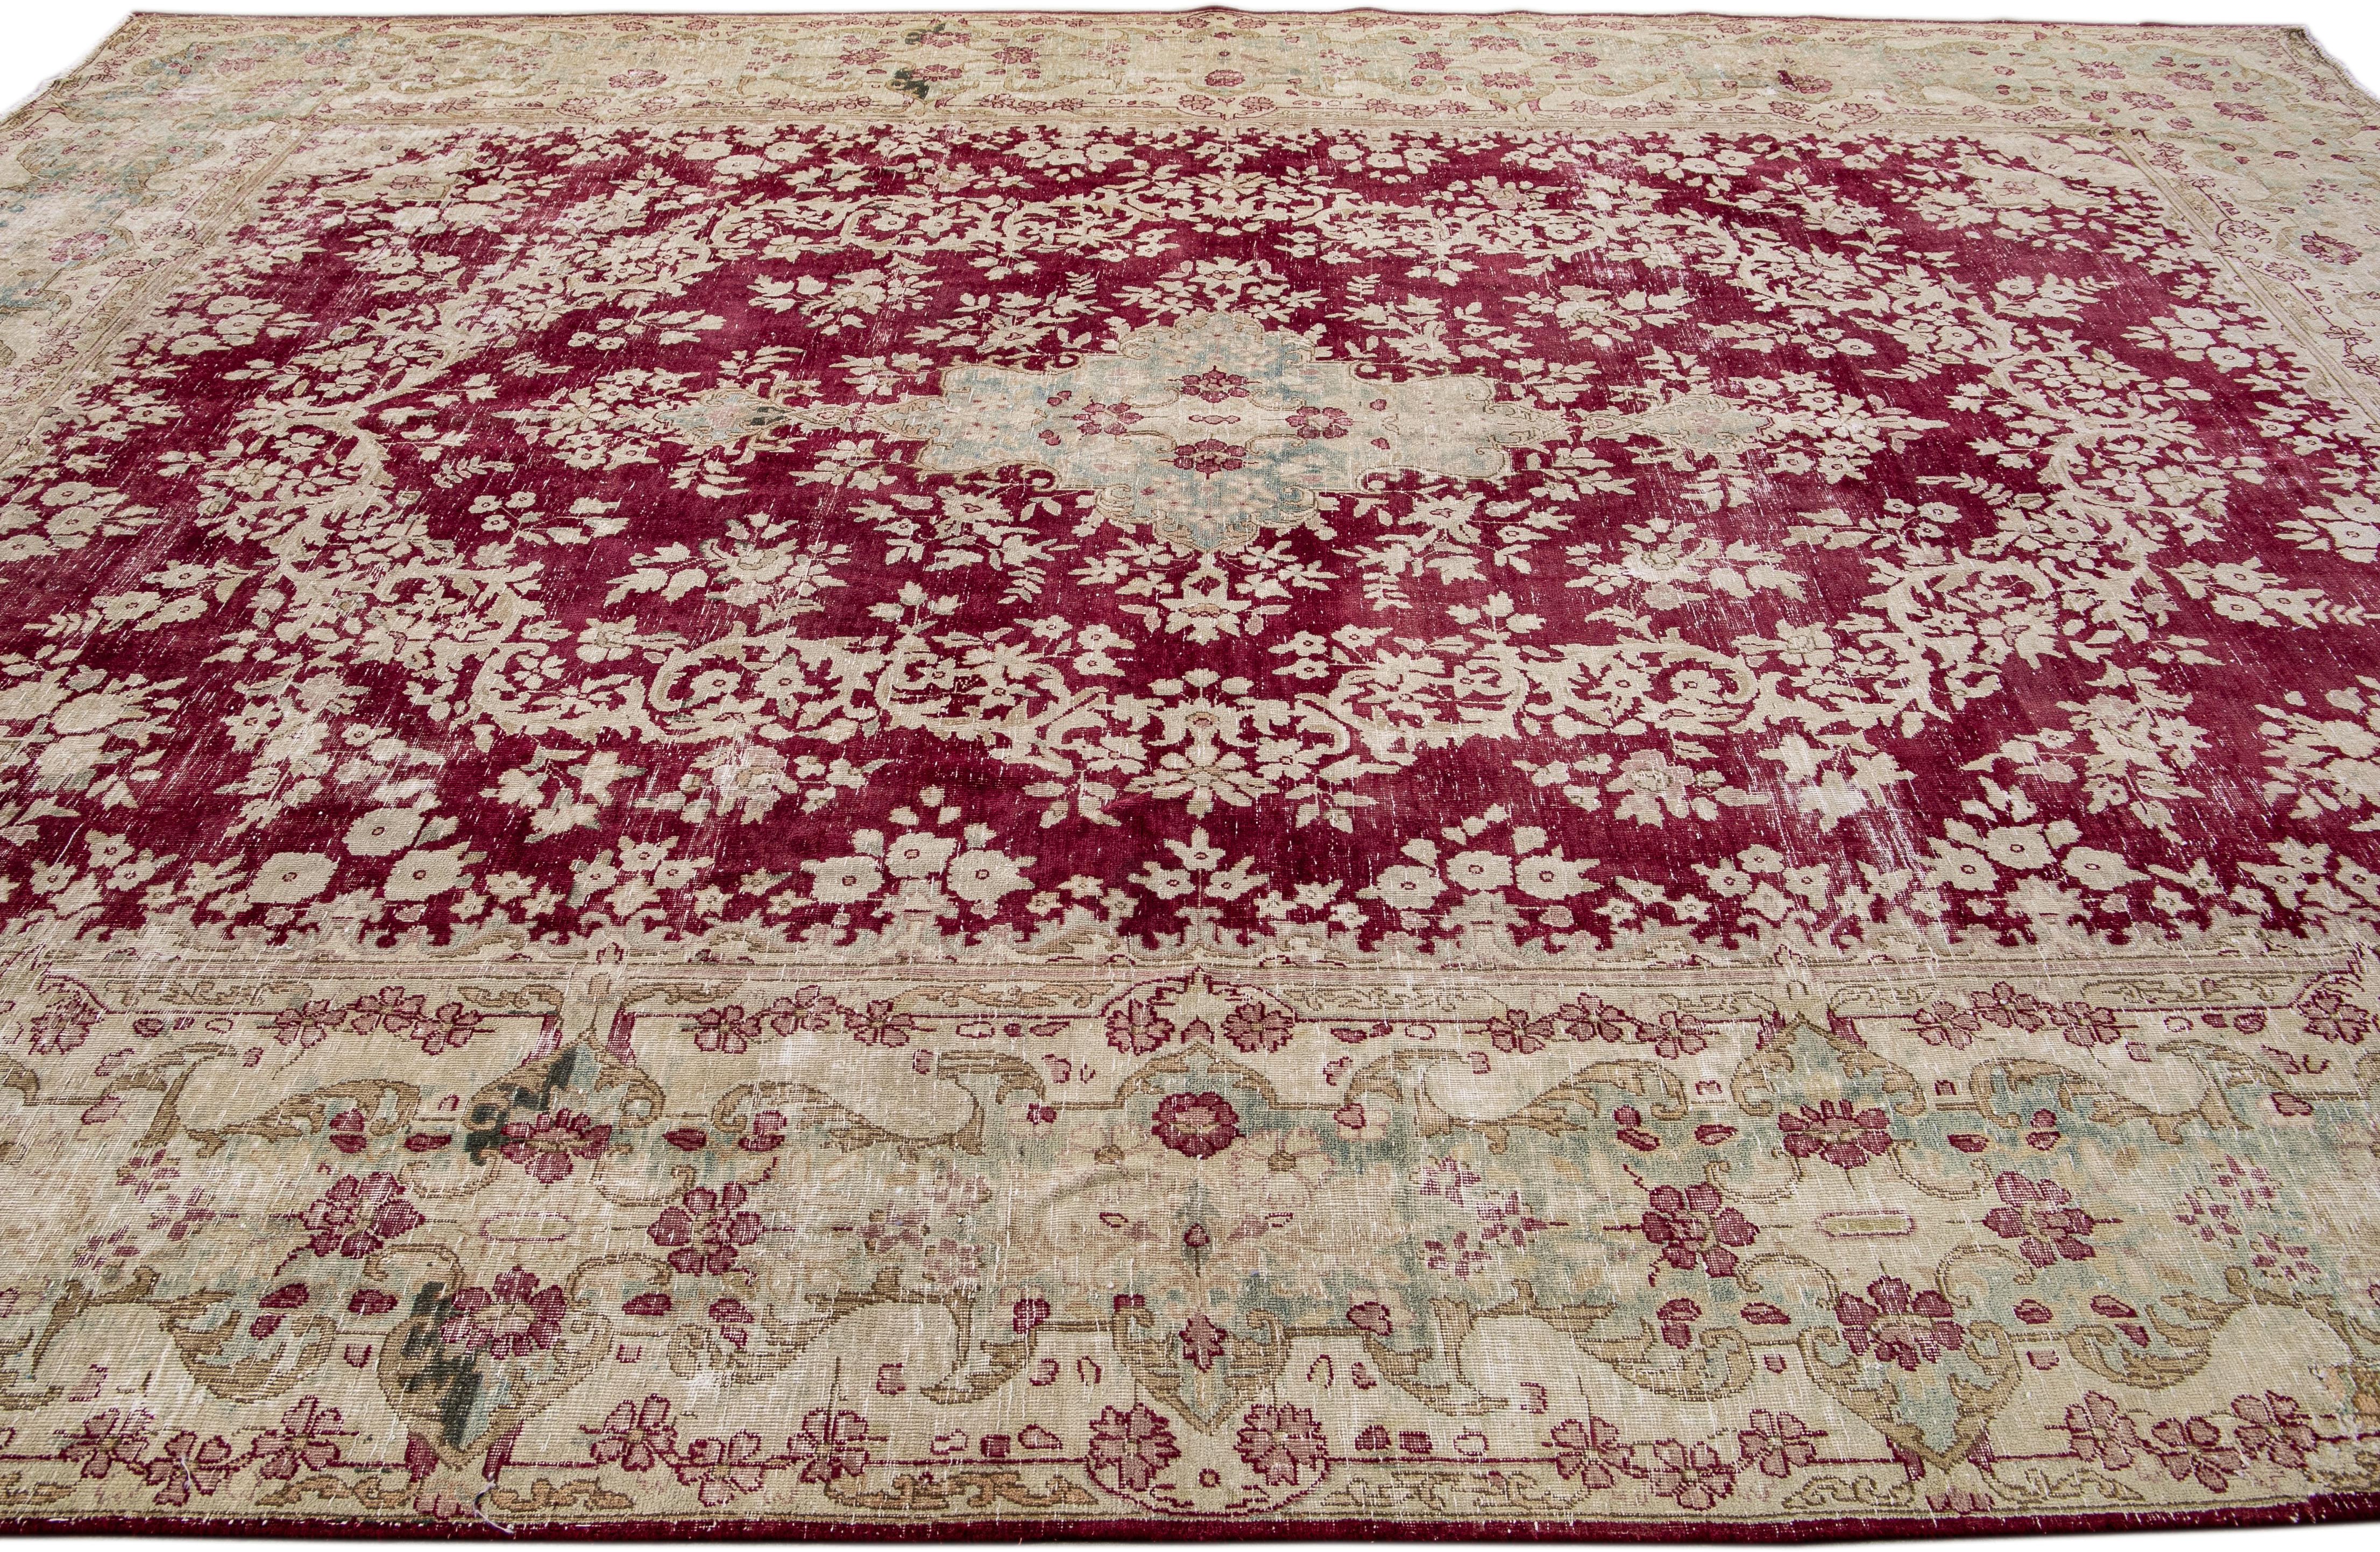 Vintage Persian Tabriz Handmade Red Wool Rug With Medallion Motif In Distressed Condition For Sale In Norwalk, CT